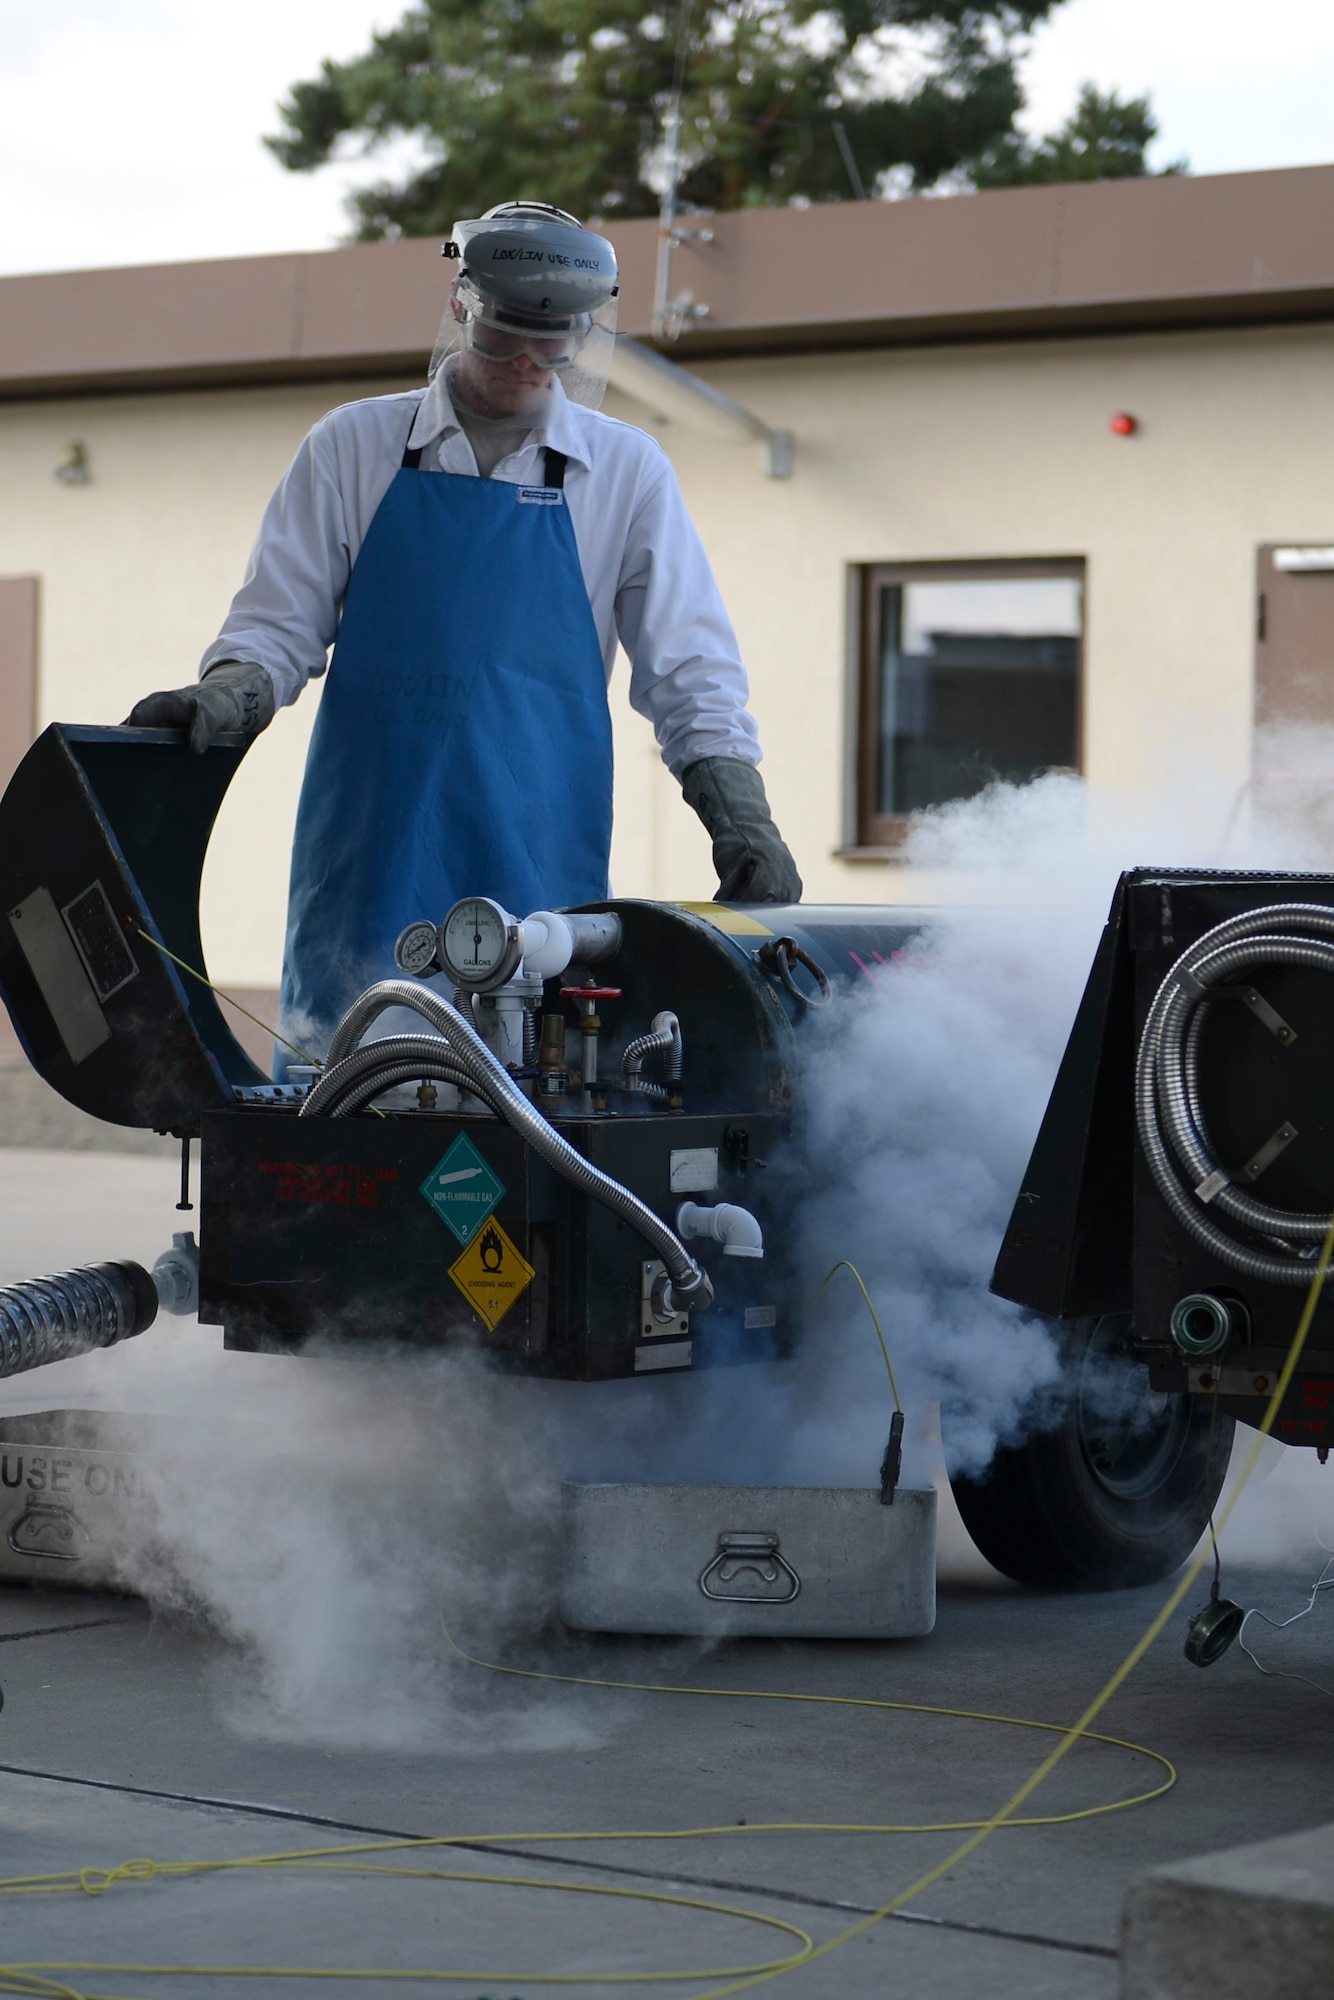 Senior Airman Seth Bruning fills a liquid oxygen tank on Ramstein Air Base, Germany, Sept. 3, 2014. Cryogenics receive, store, maintain and issue liquid oxygen and liquid nitrogen to aircrafts so the aircrew can breathe while at higher altitudes. Bruning is a hydrants technician with the 86th Logistics Readiness Squadron. (U.S. Air Force photo/Airman 1st Class Michael Stuart)